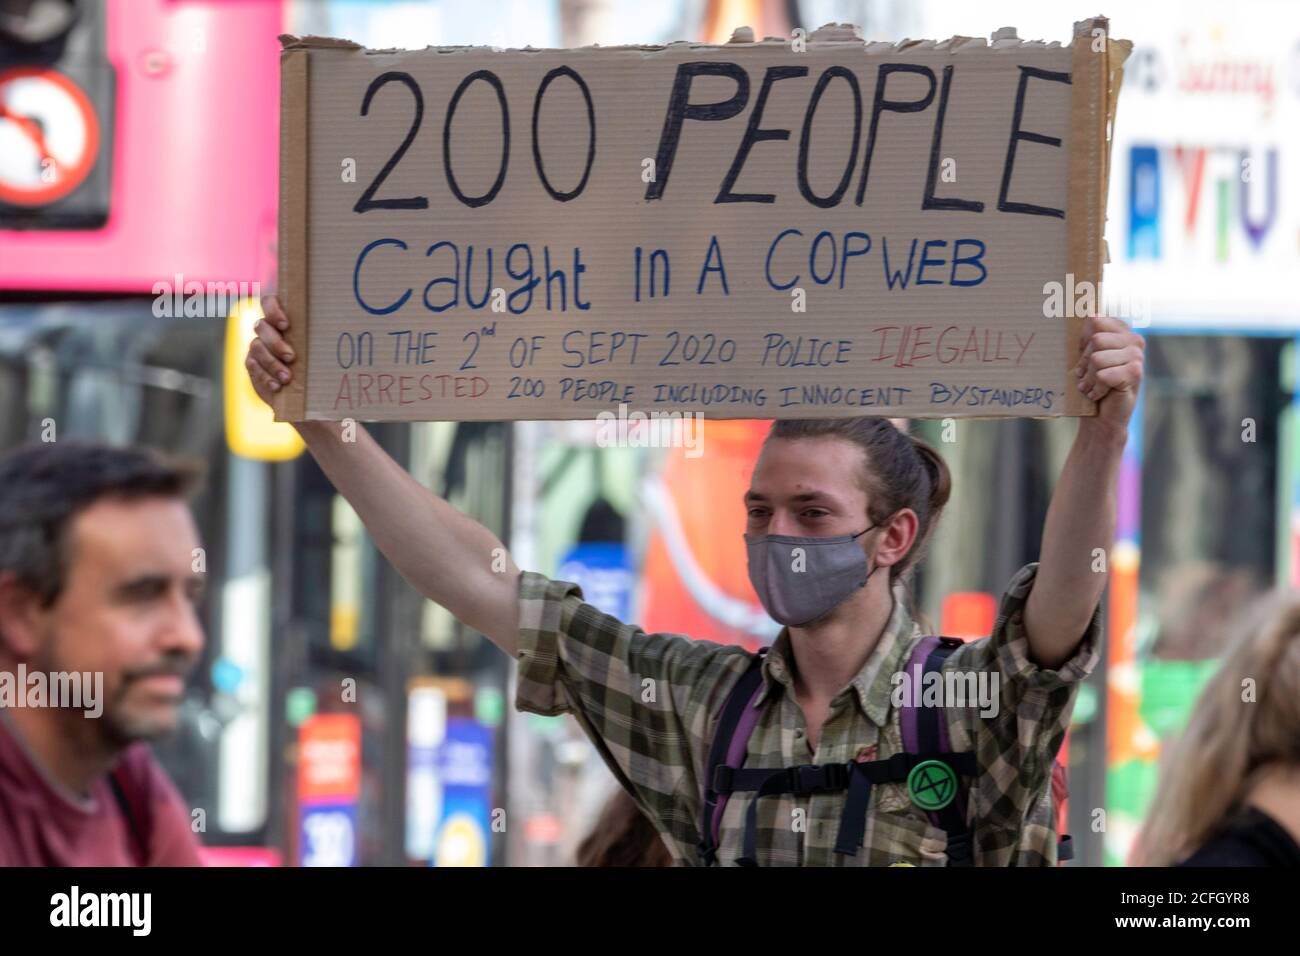 London, UK. September 5th 2020. Extinction Rebellion protests continued in Westminister today. Police were present in large numbers which ensured the various demostrations were peaceful. Credit: Pete Abel/Alamy Live News Stock Photo